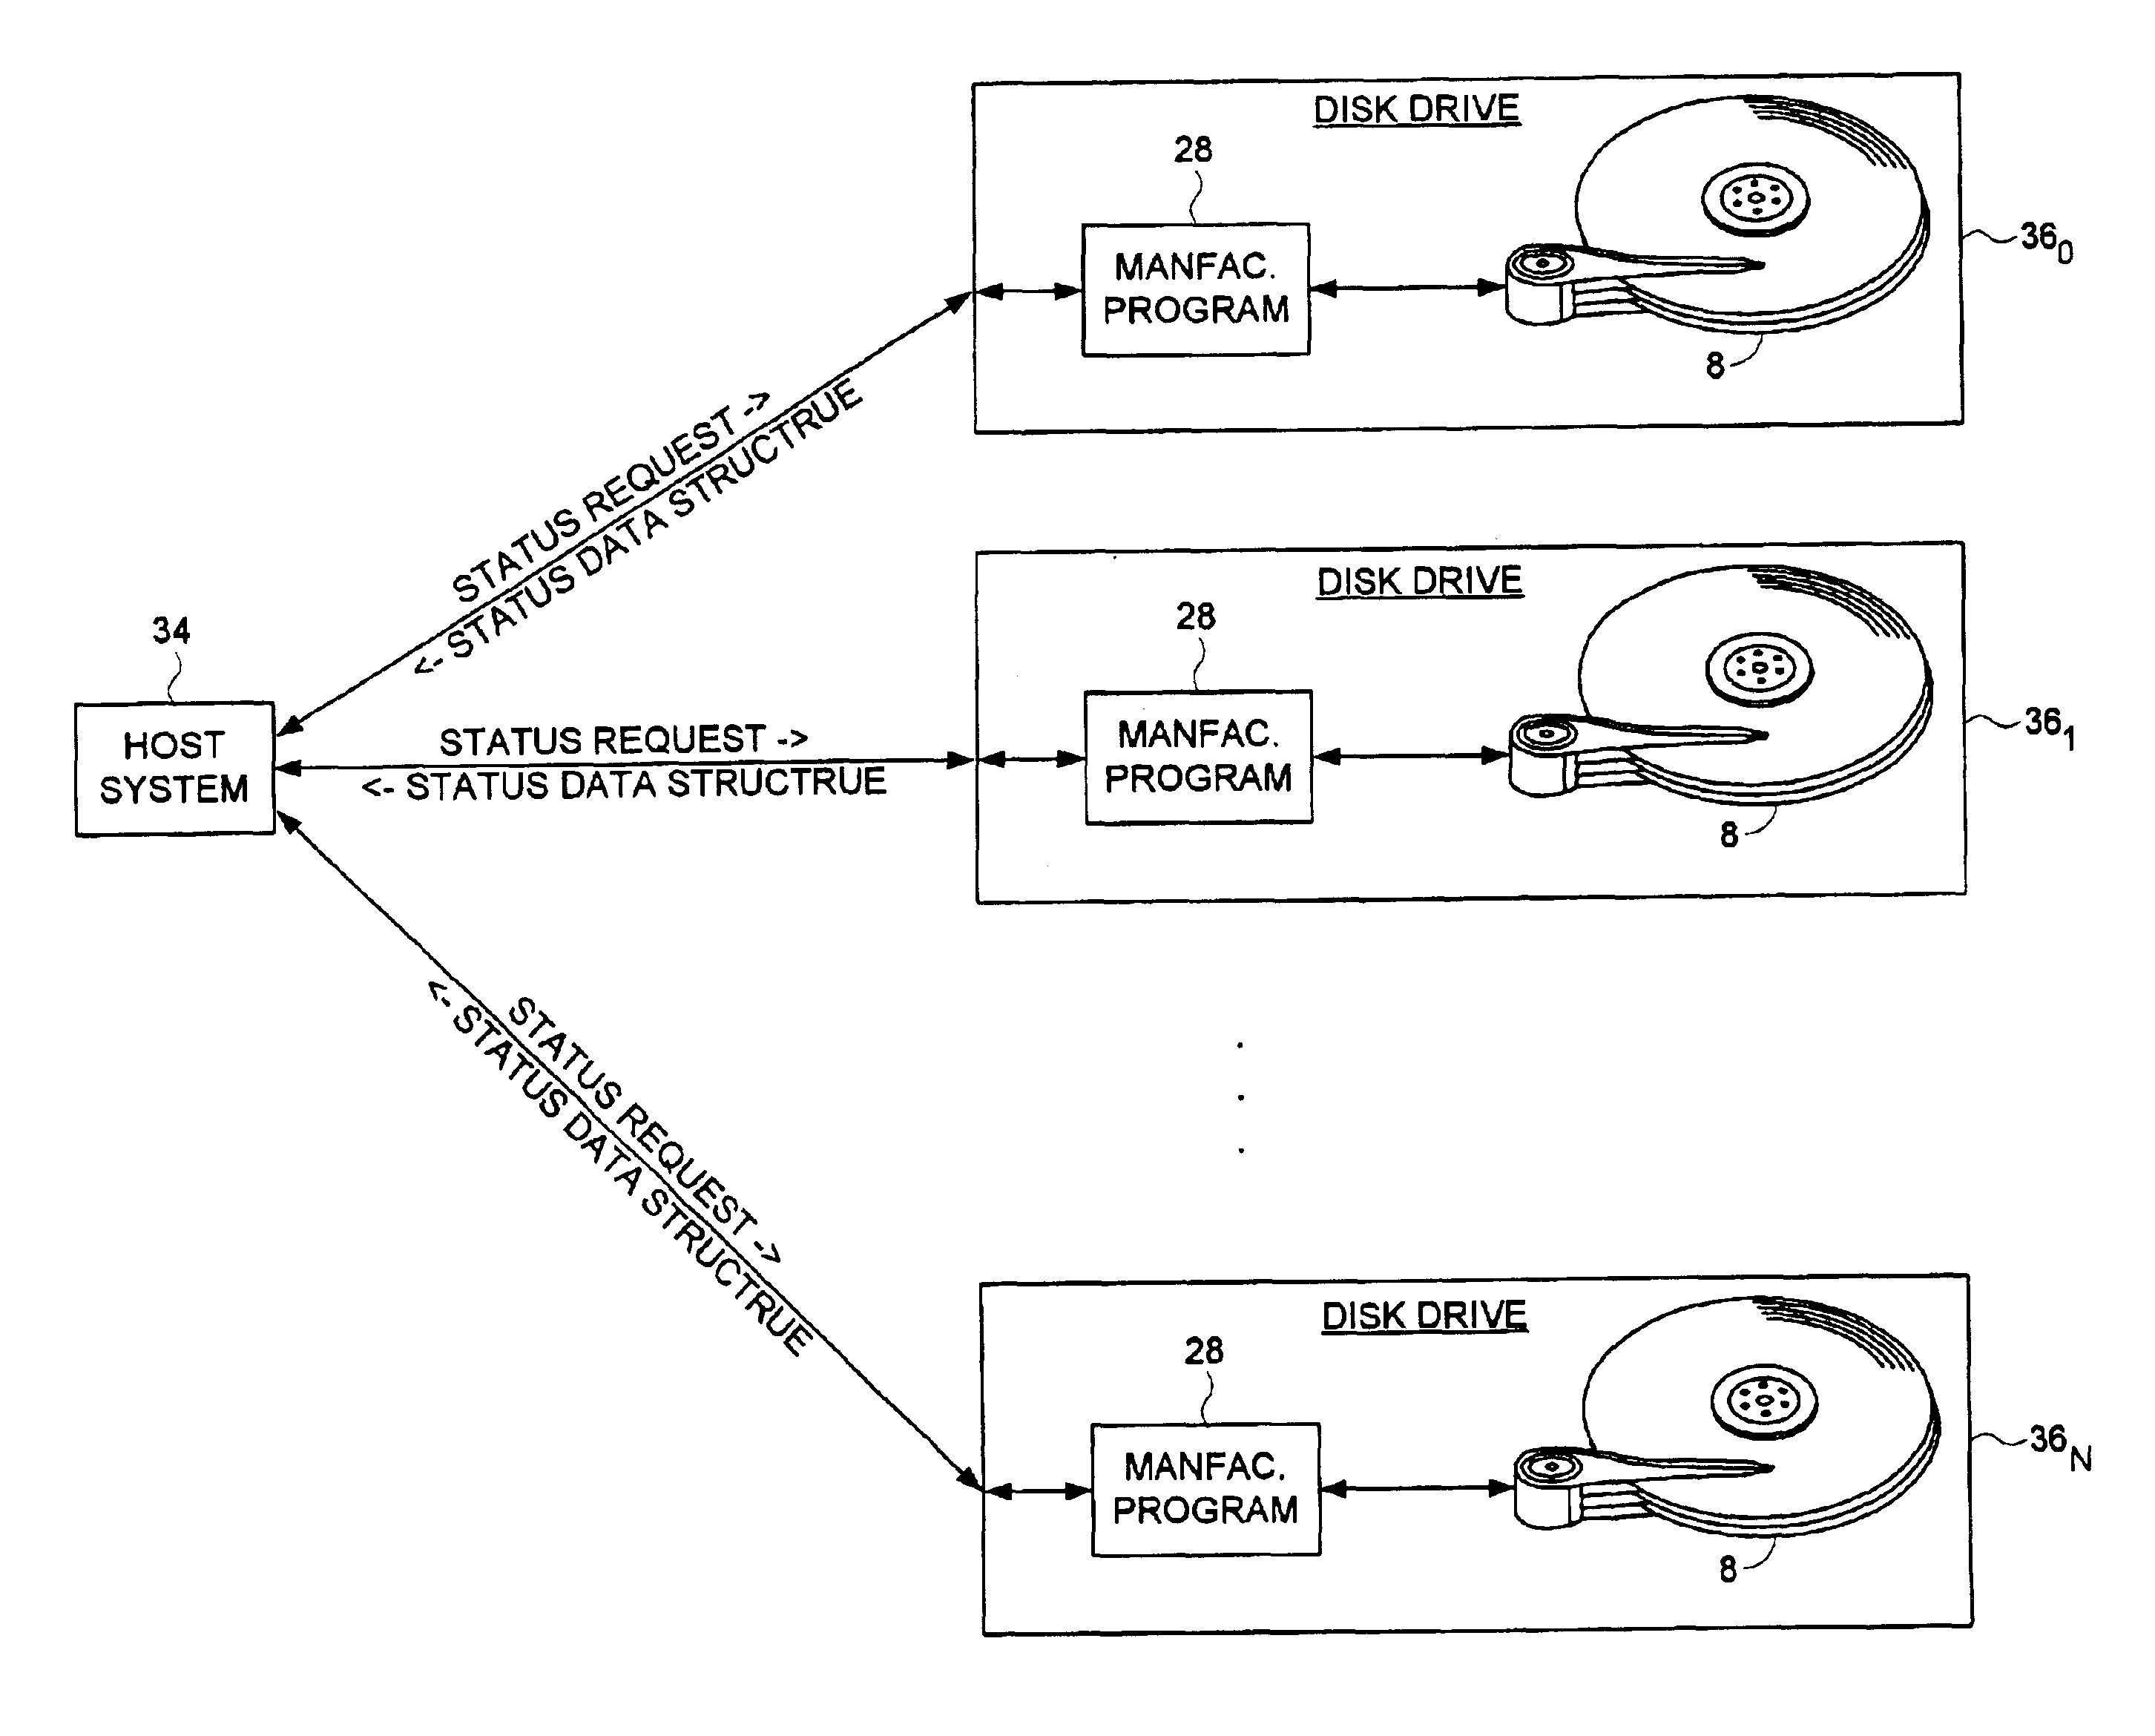 Disk drive executing a manufacturing program internally by executing disk commands through a vector